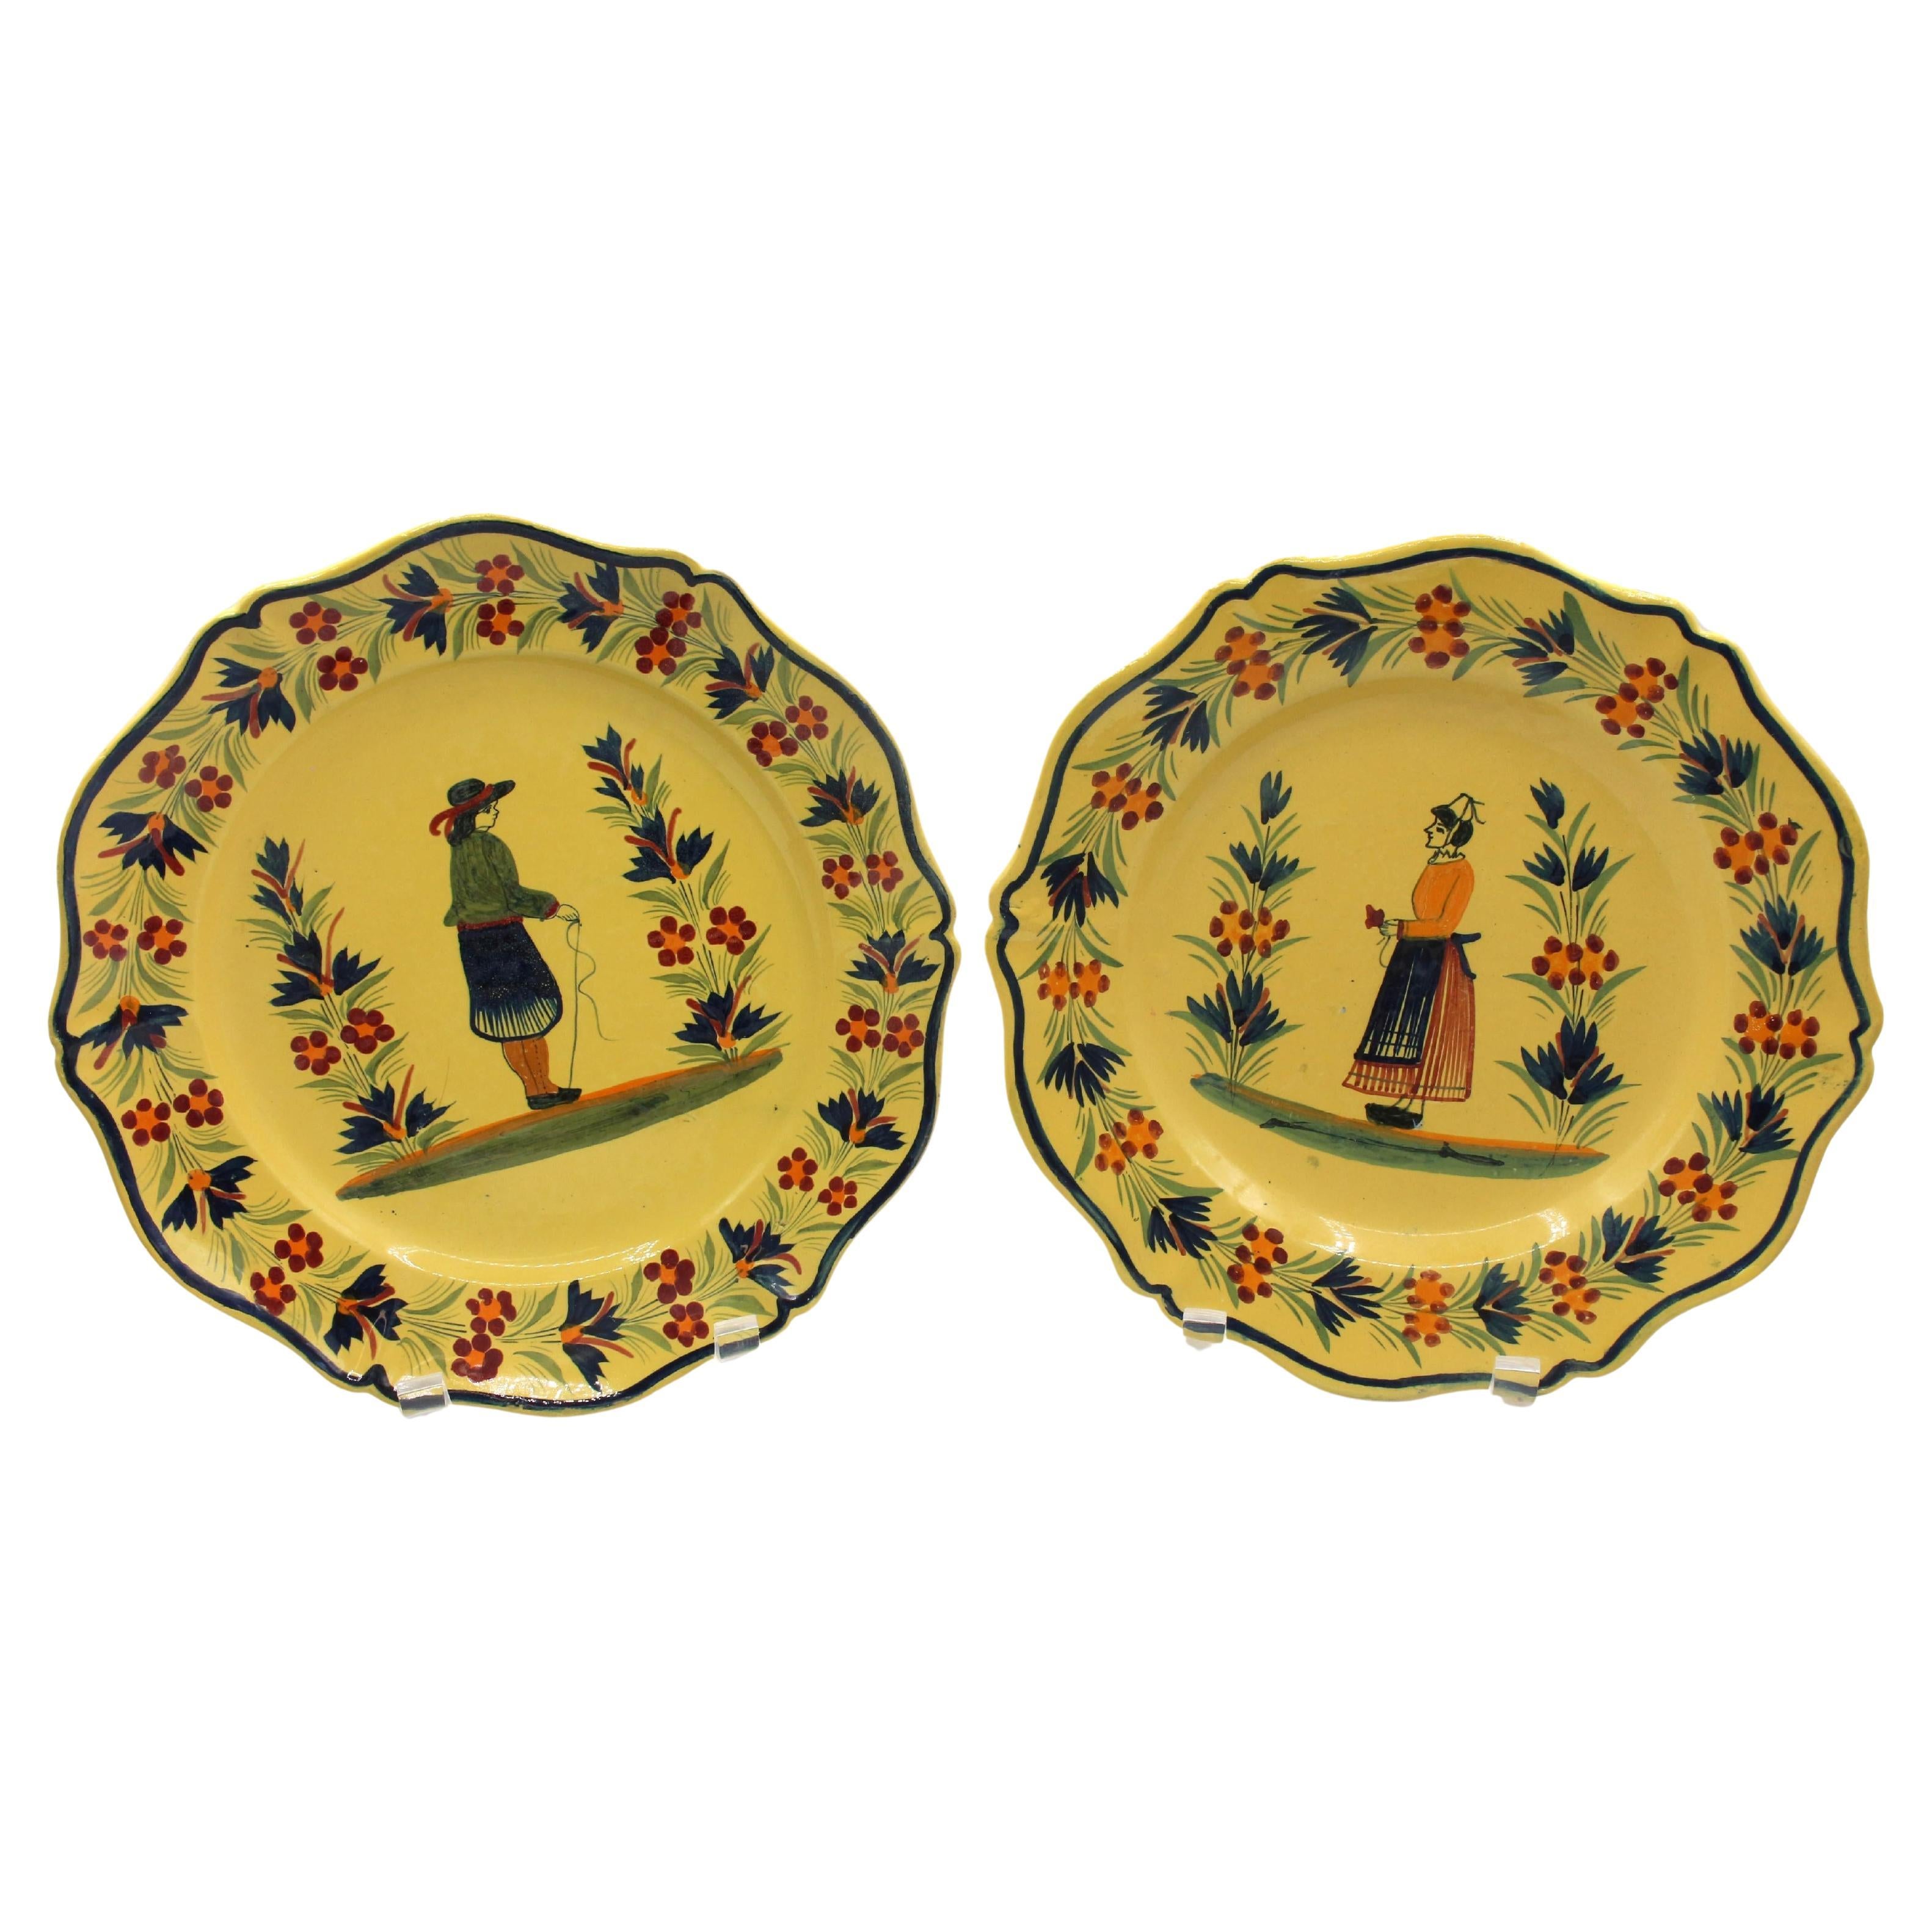 Assembled Pair of Large Yellow Ground Quimper Plates, Mid-20th Century